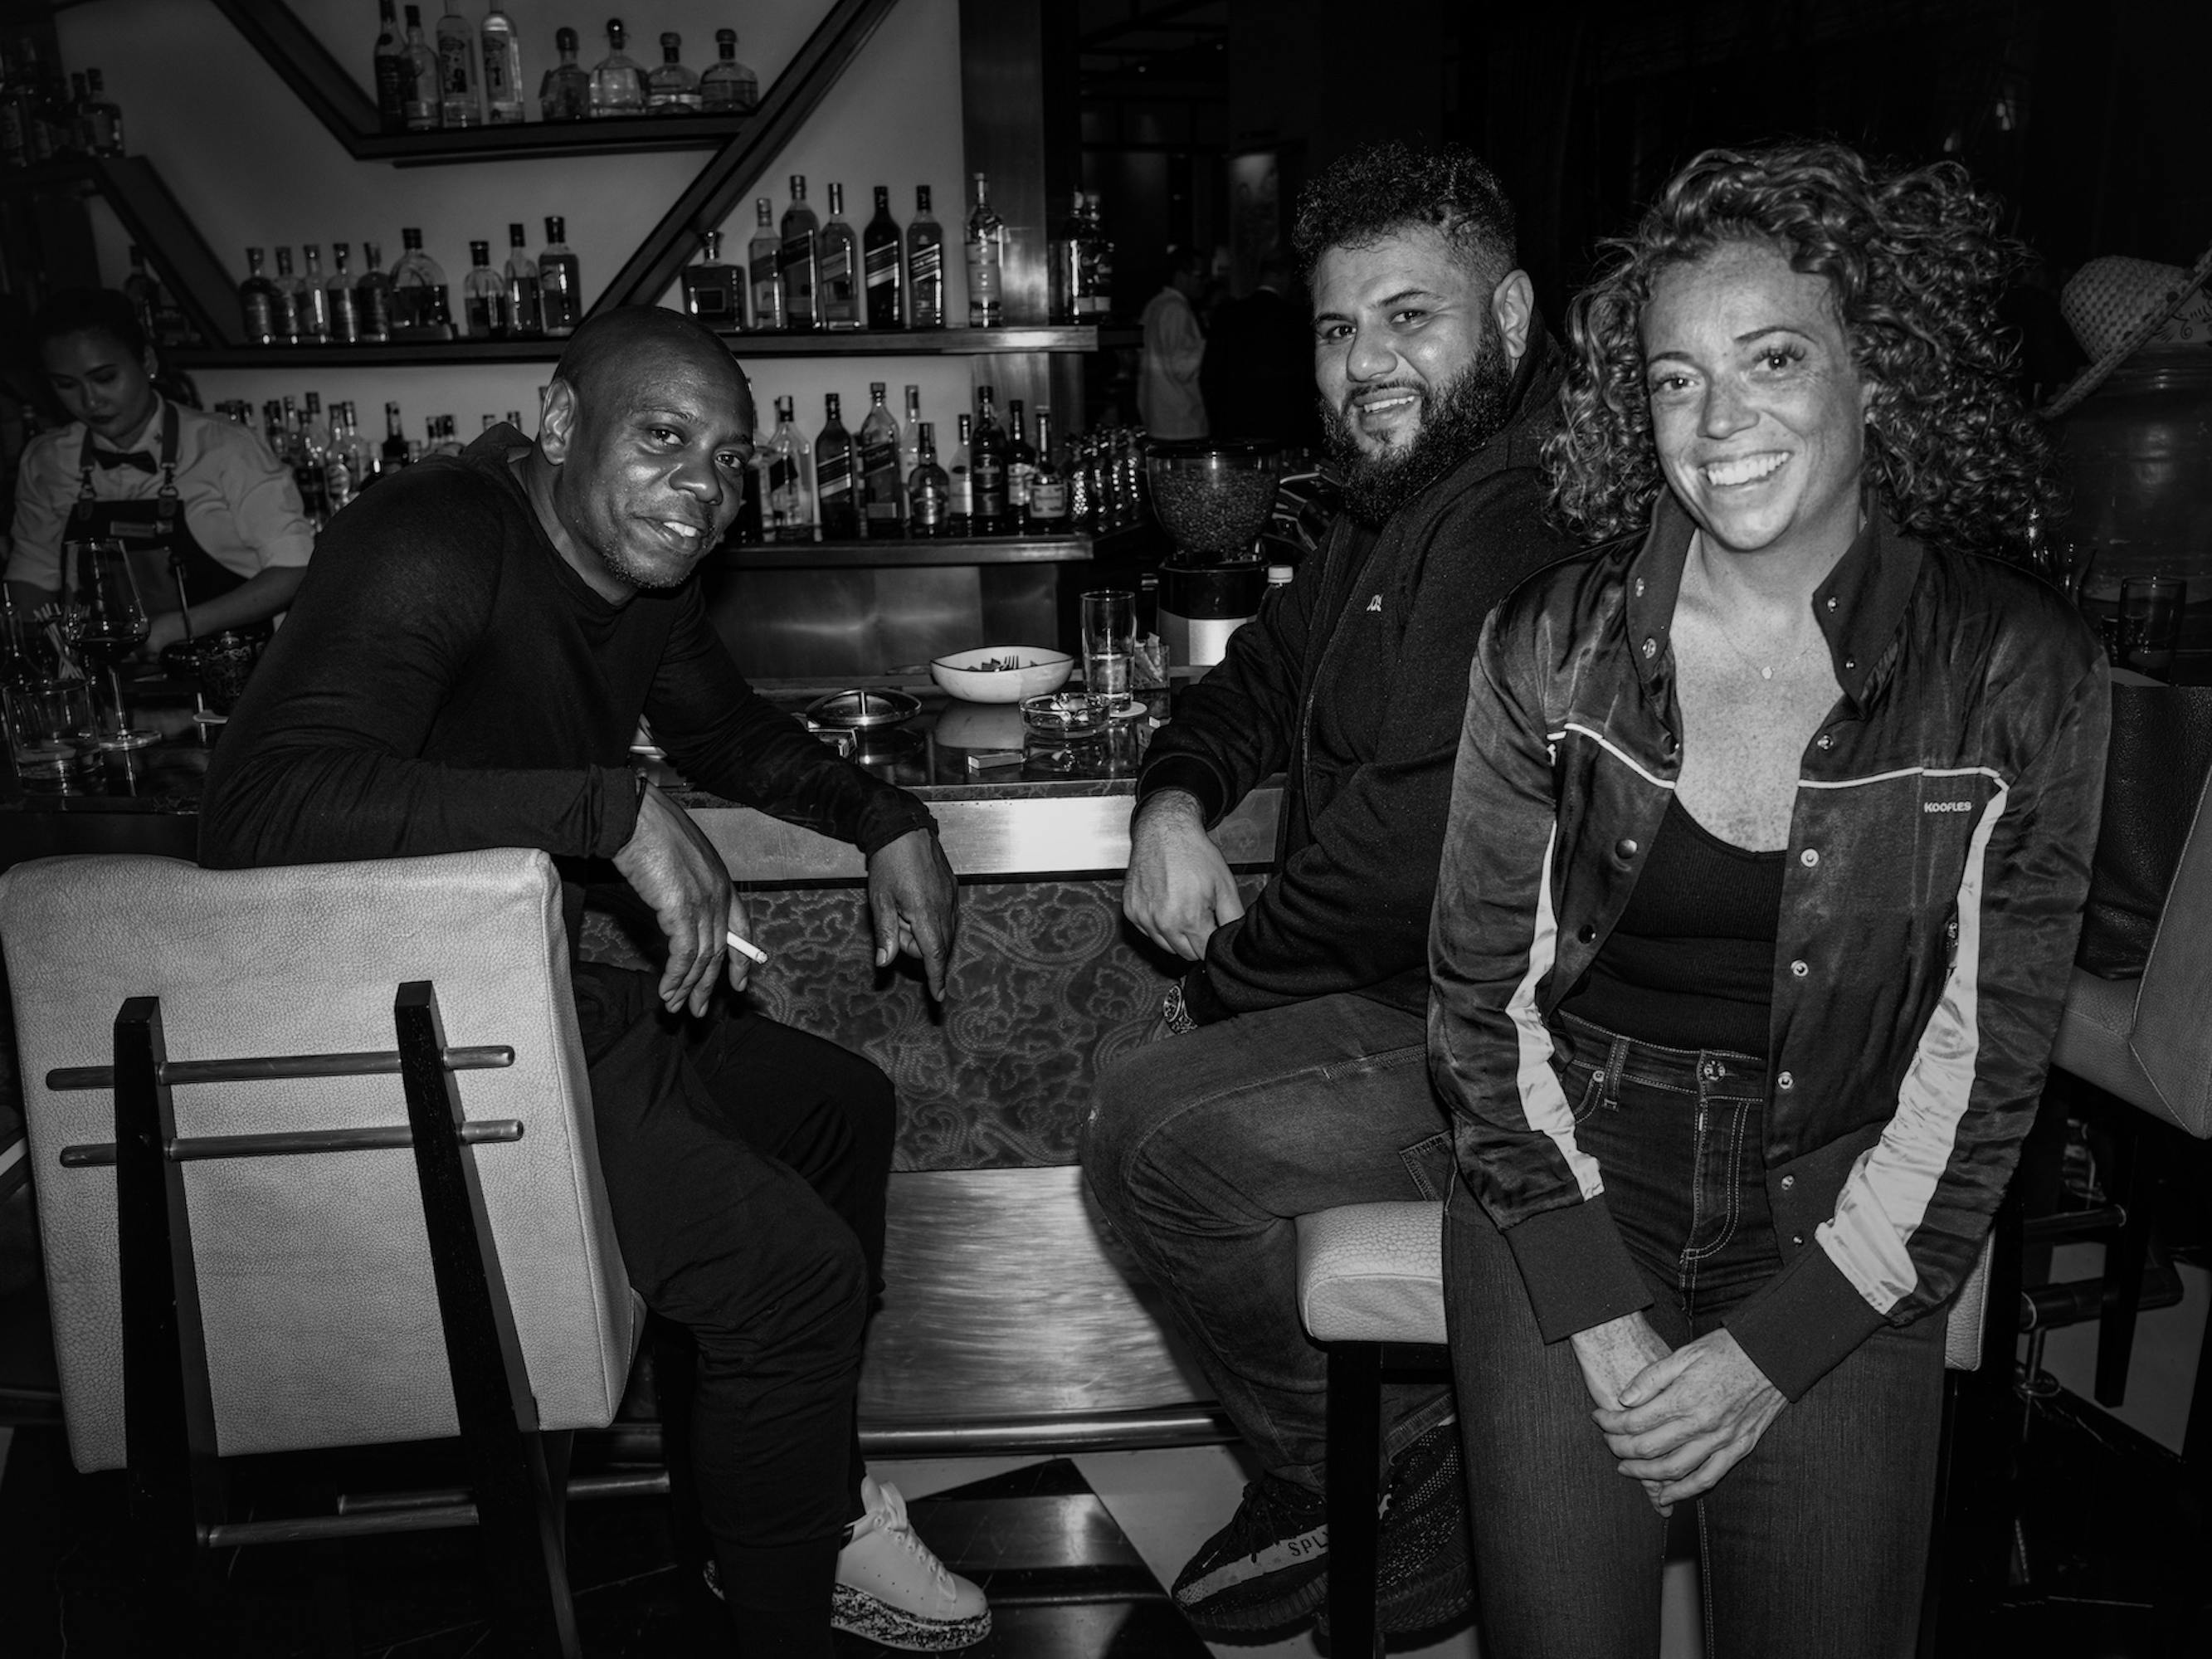 Chappelle, Mo Amer, and Michelle Wolf sit at a bar. They each wear all black and smile.